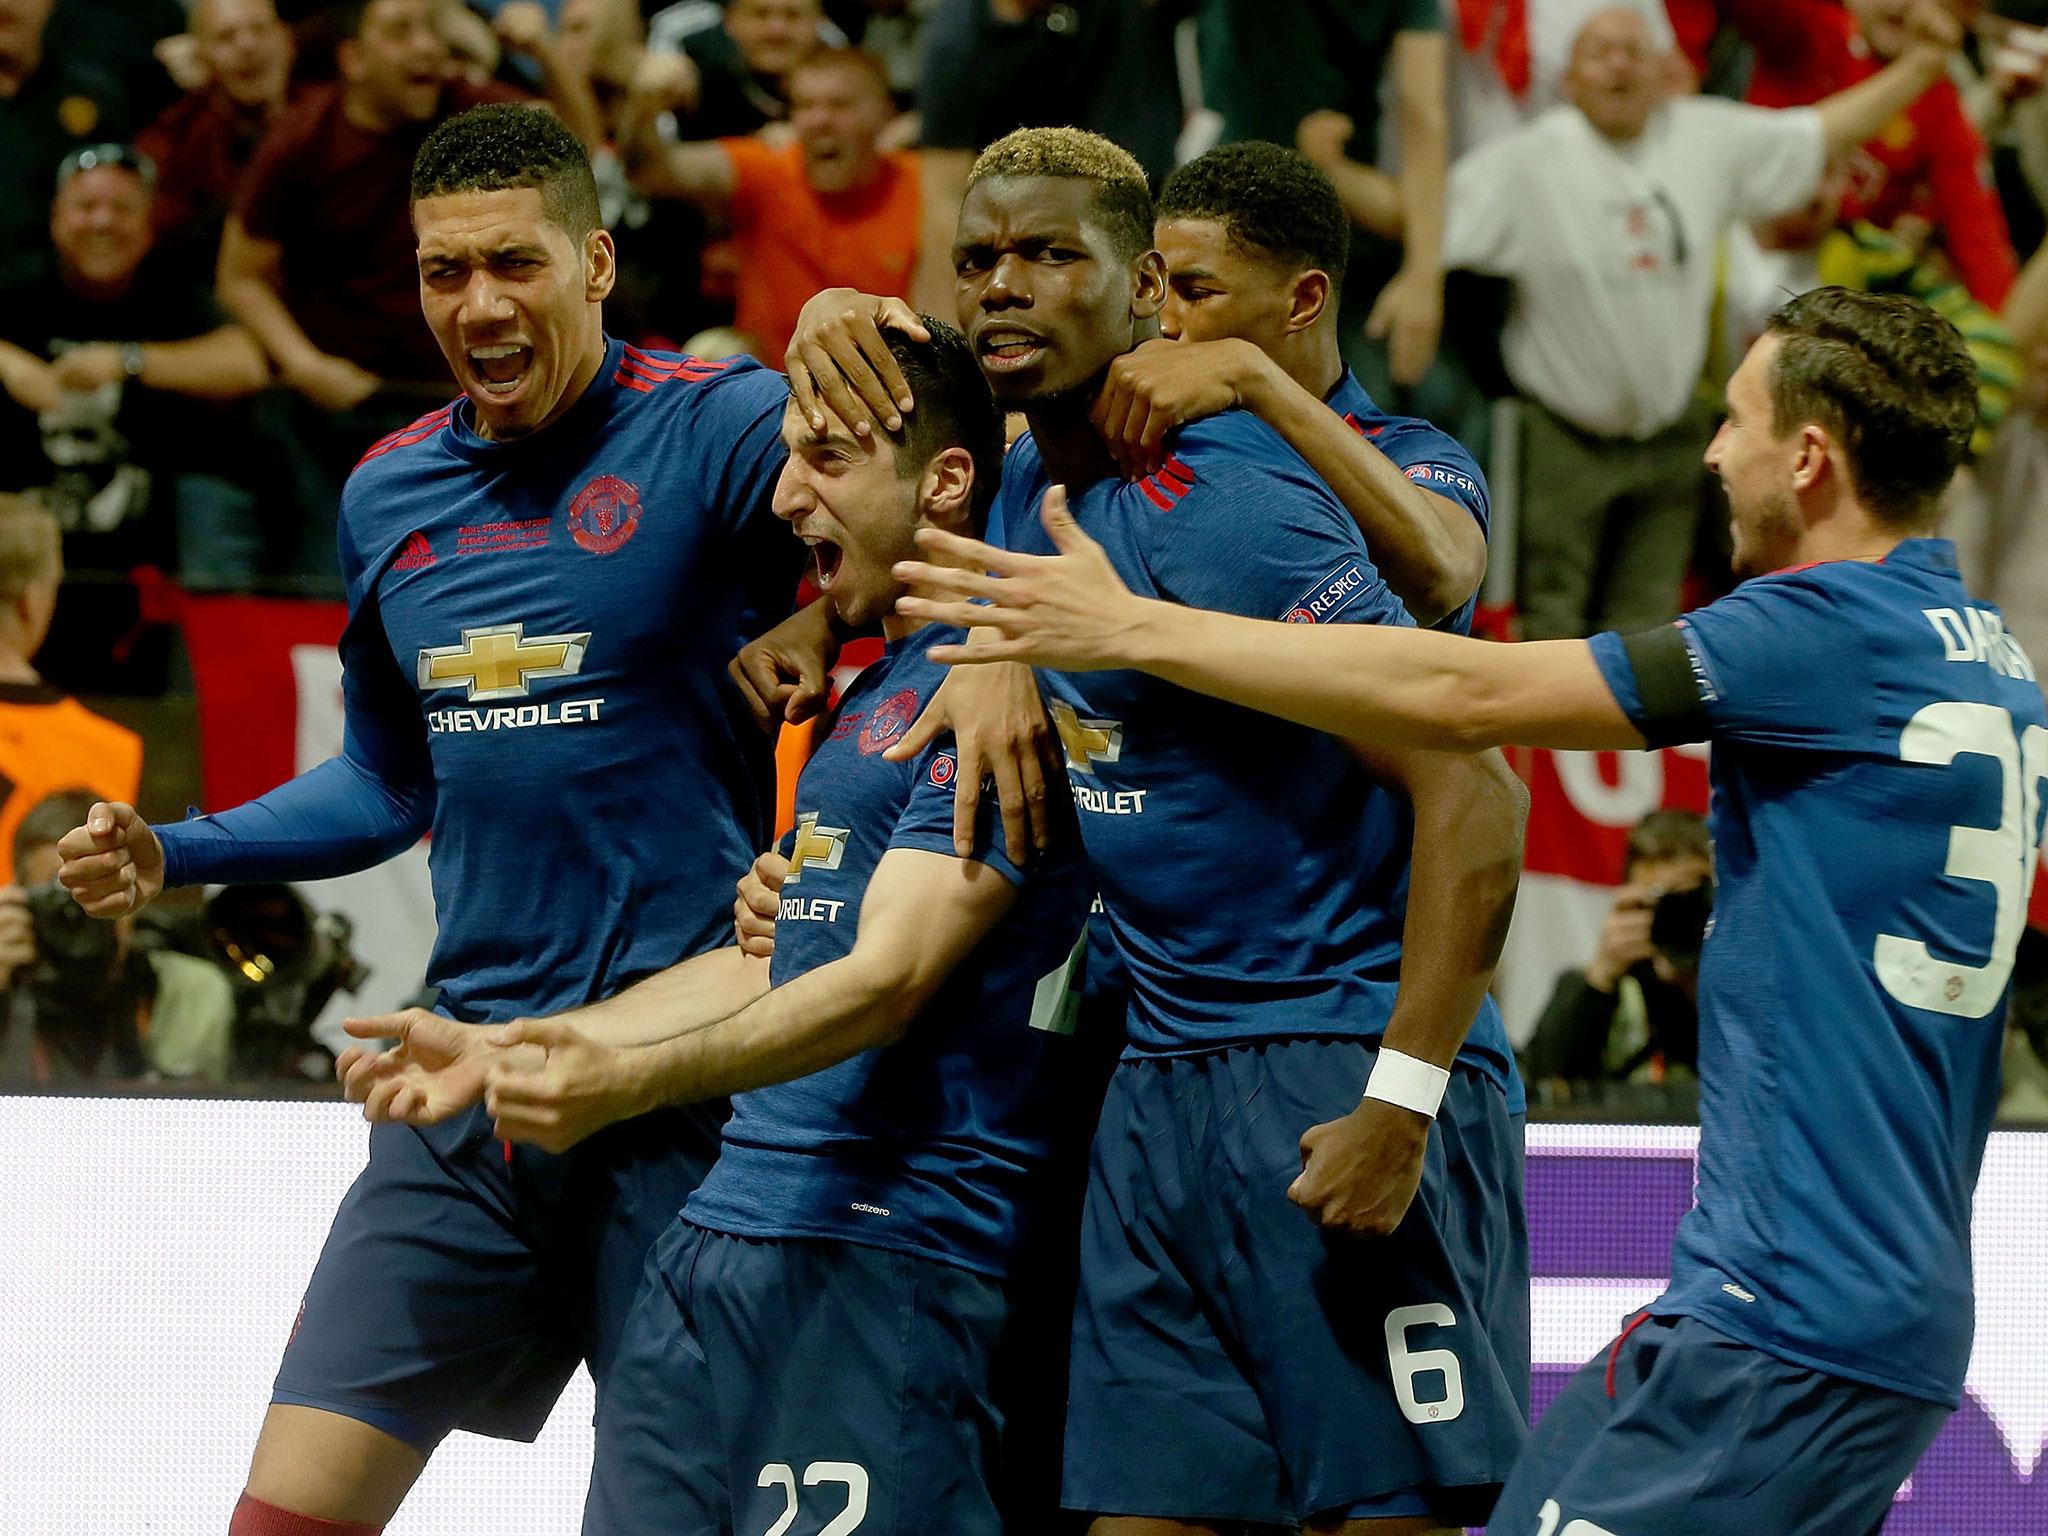 "I think we’re very blessed to have the changing room that we have,” Smalling said